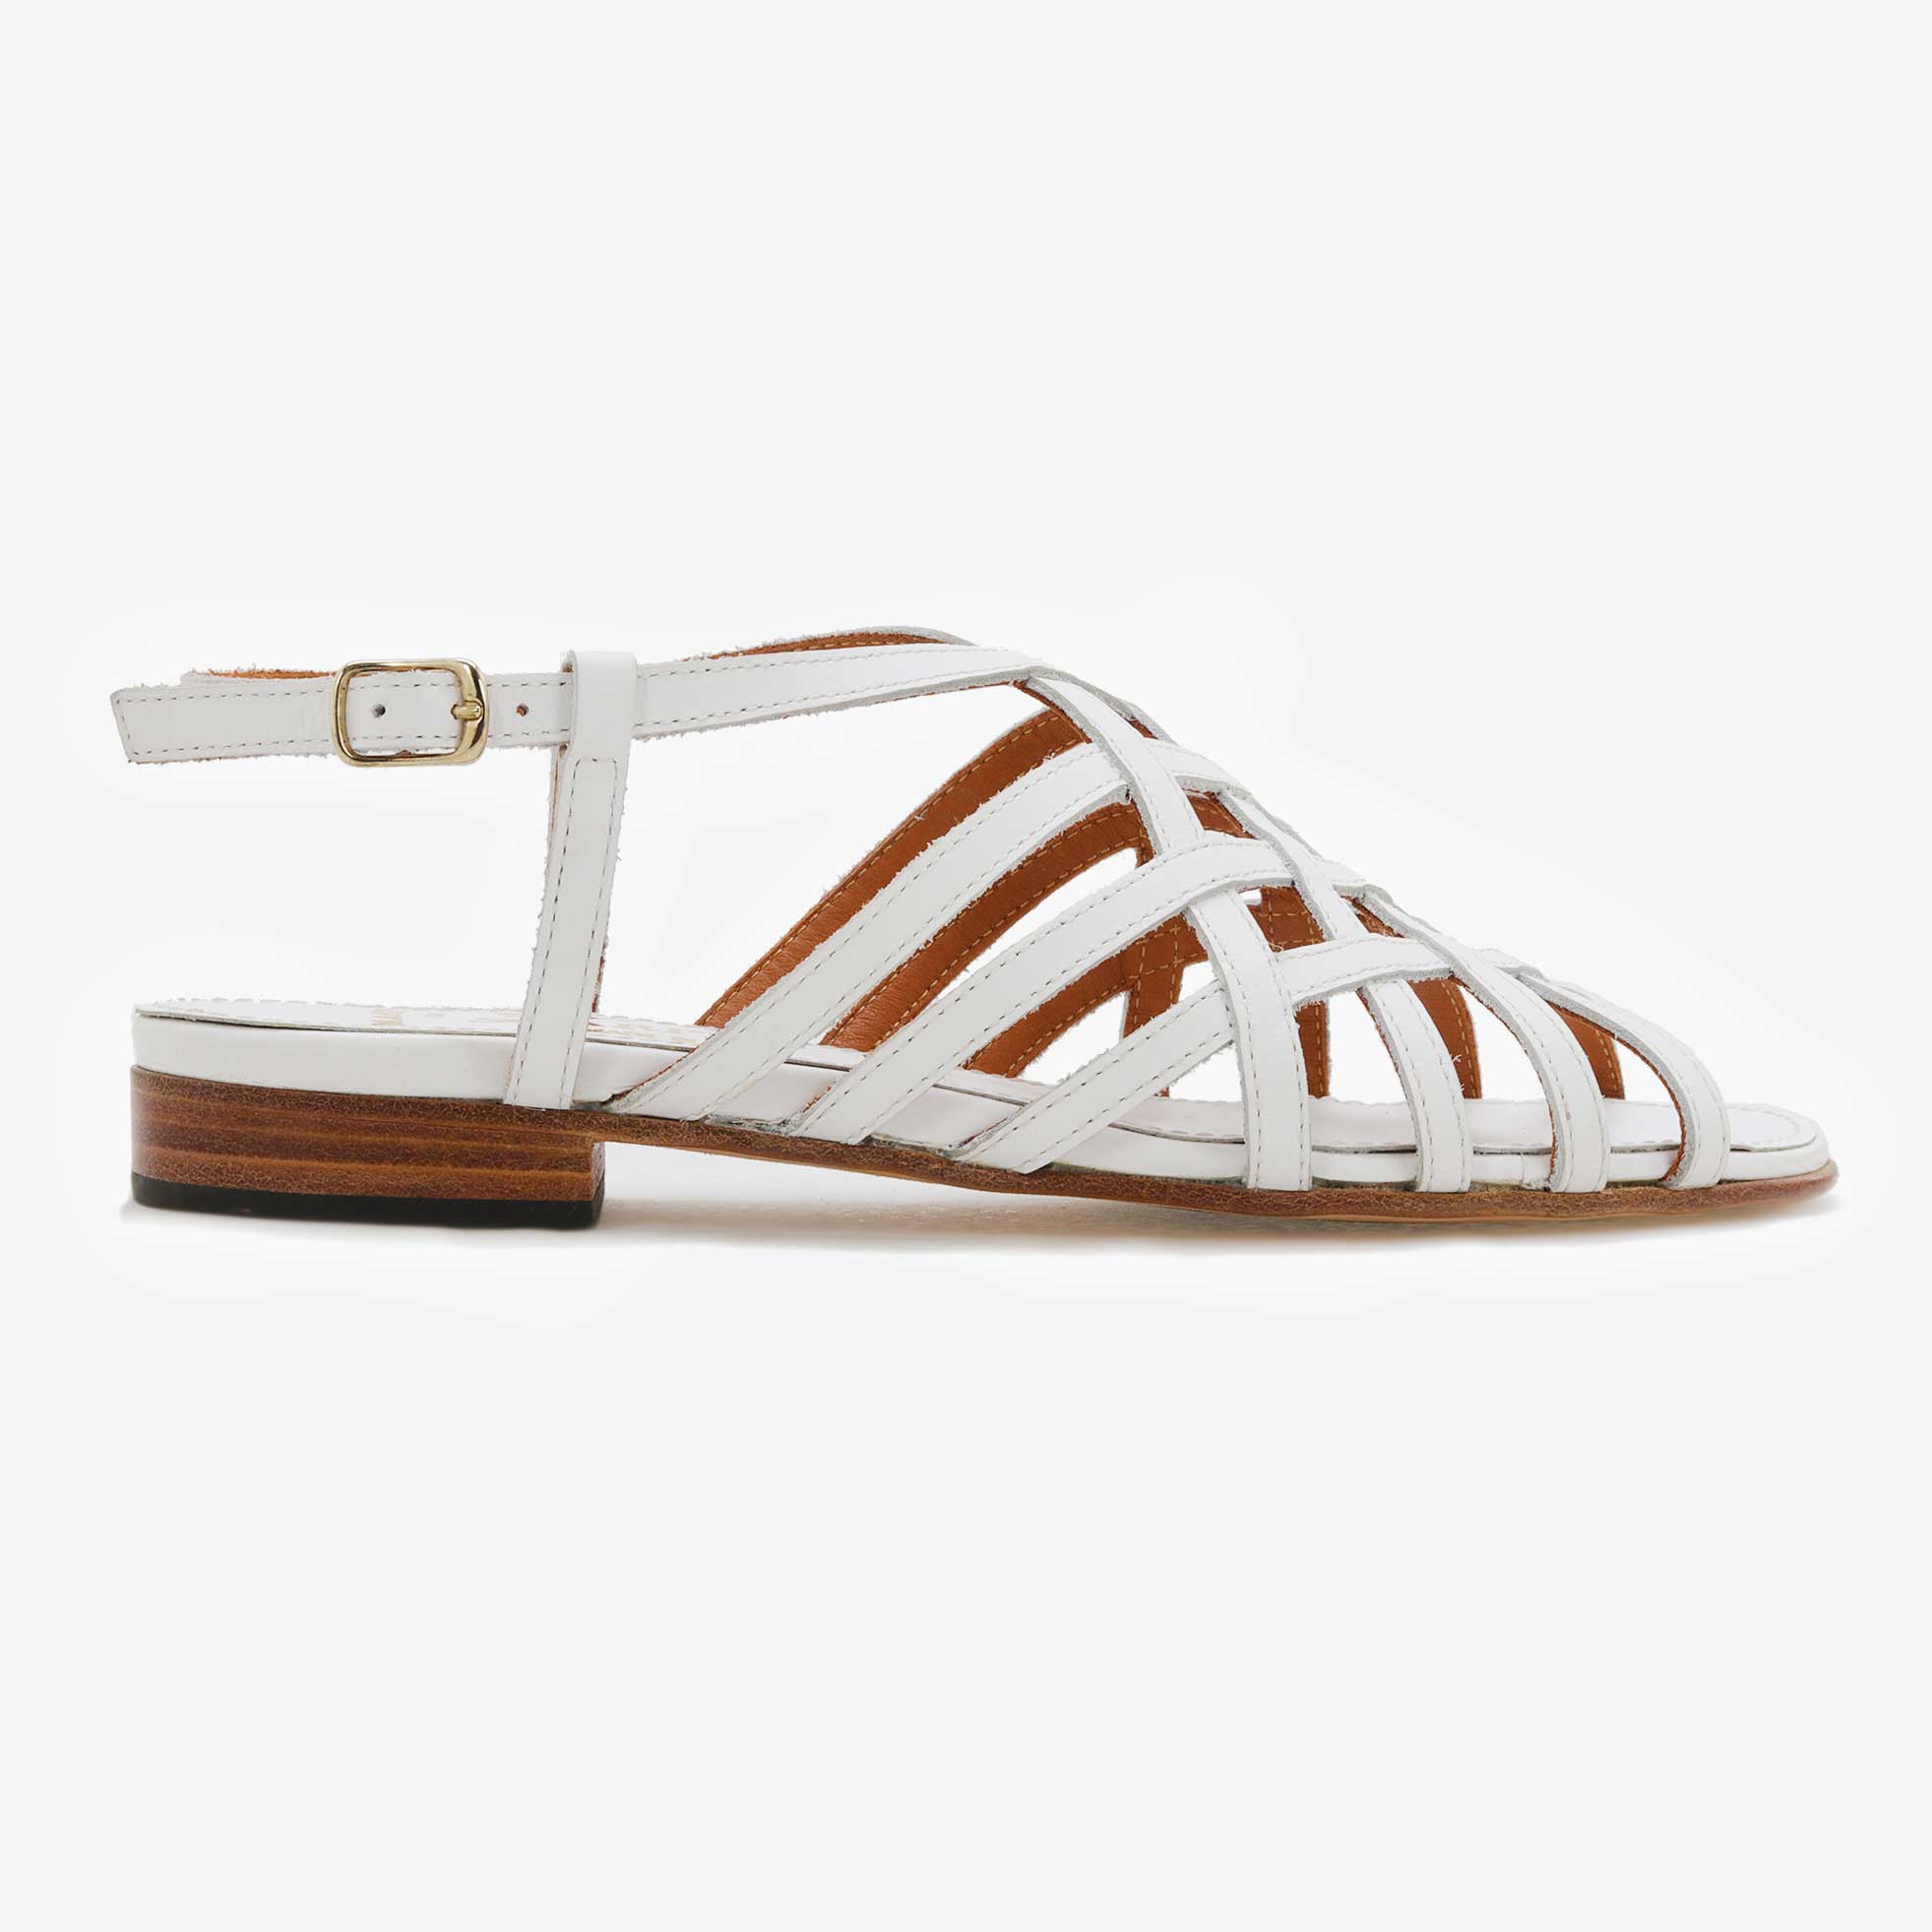 Women's leather sandal with crossed straps